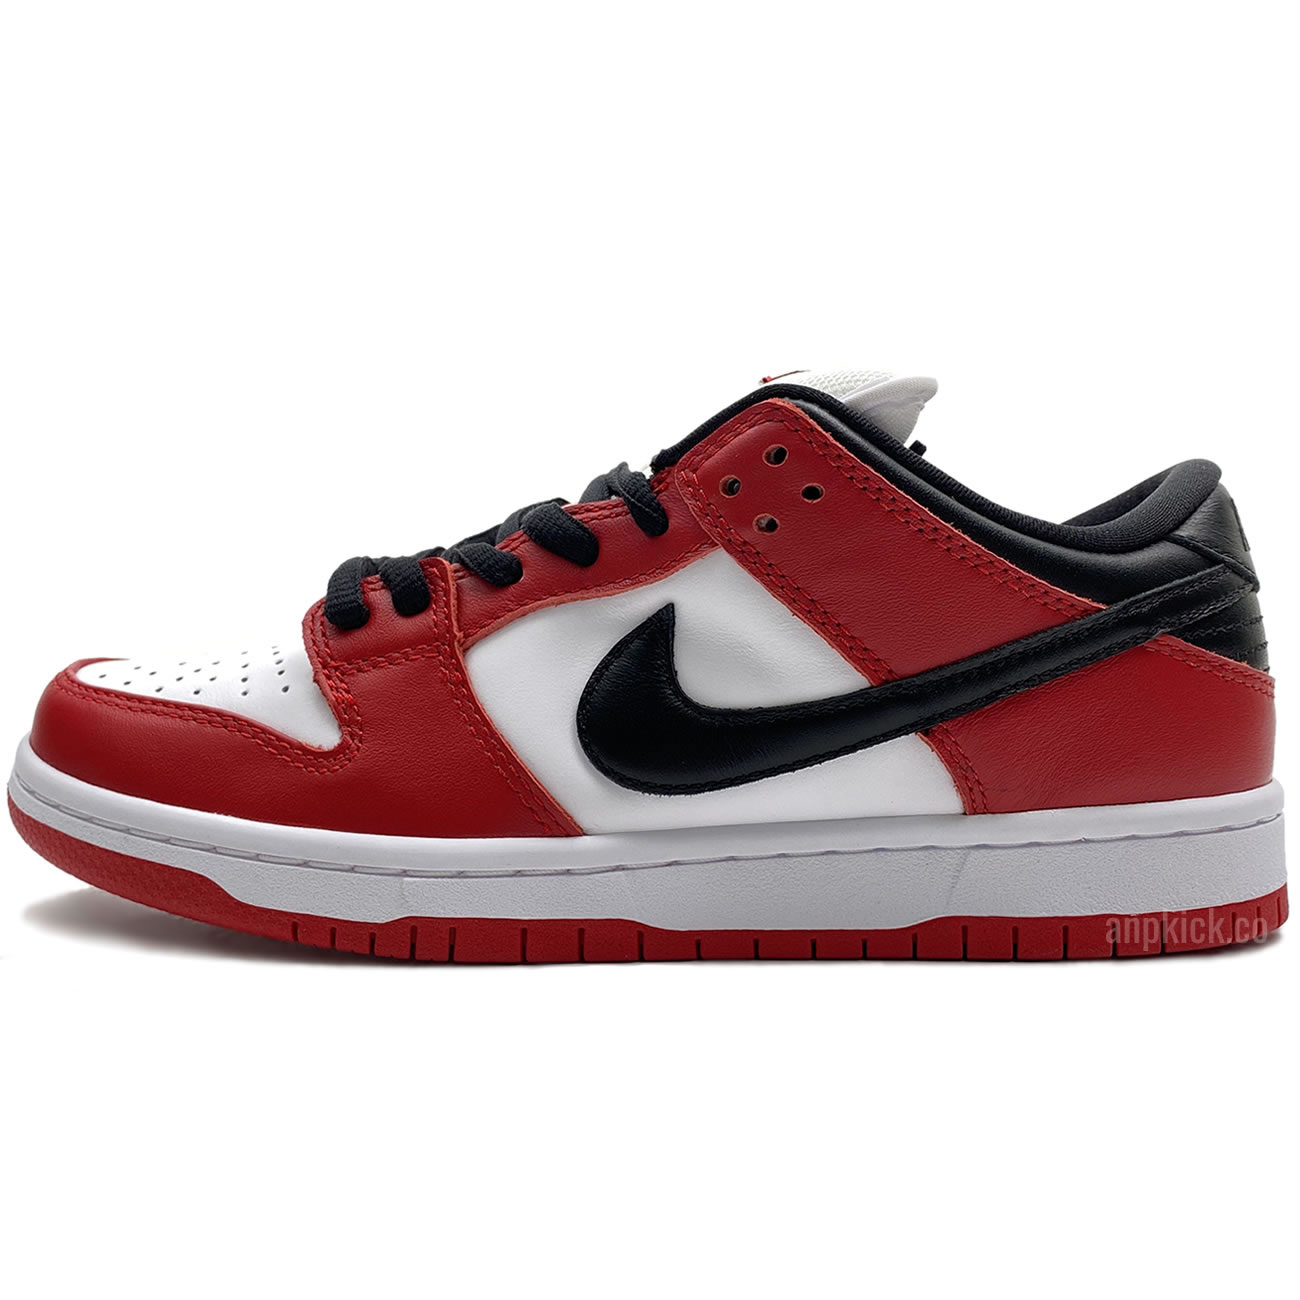 Nike Sb Dunk Low Pro Chicago Varsity Red Release Date Bq6817 600 (1) - newkick.org